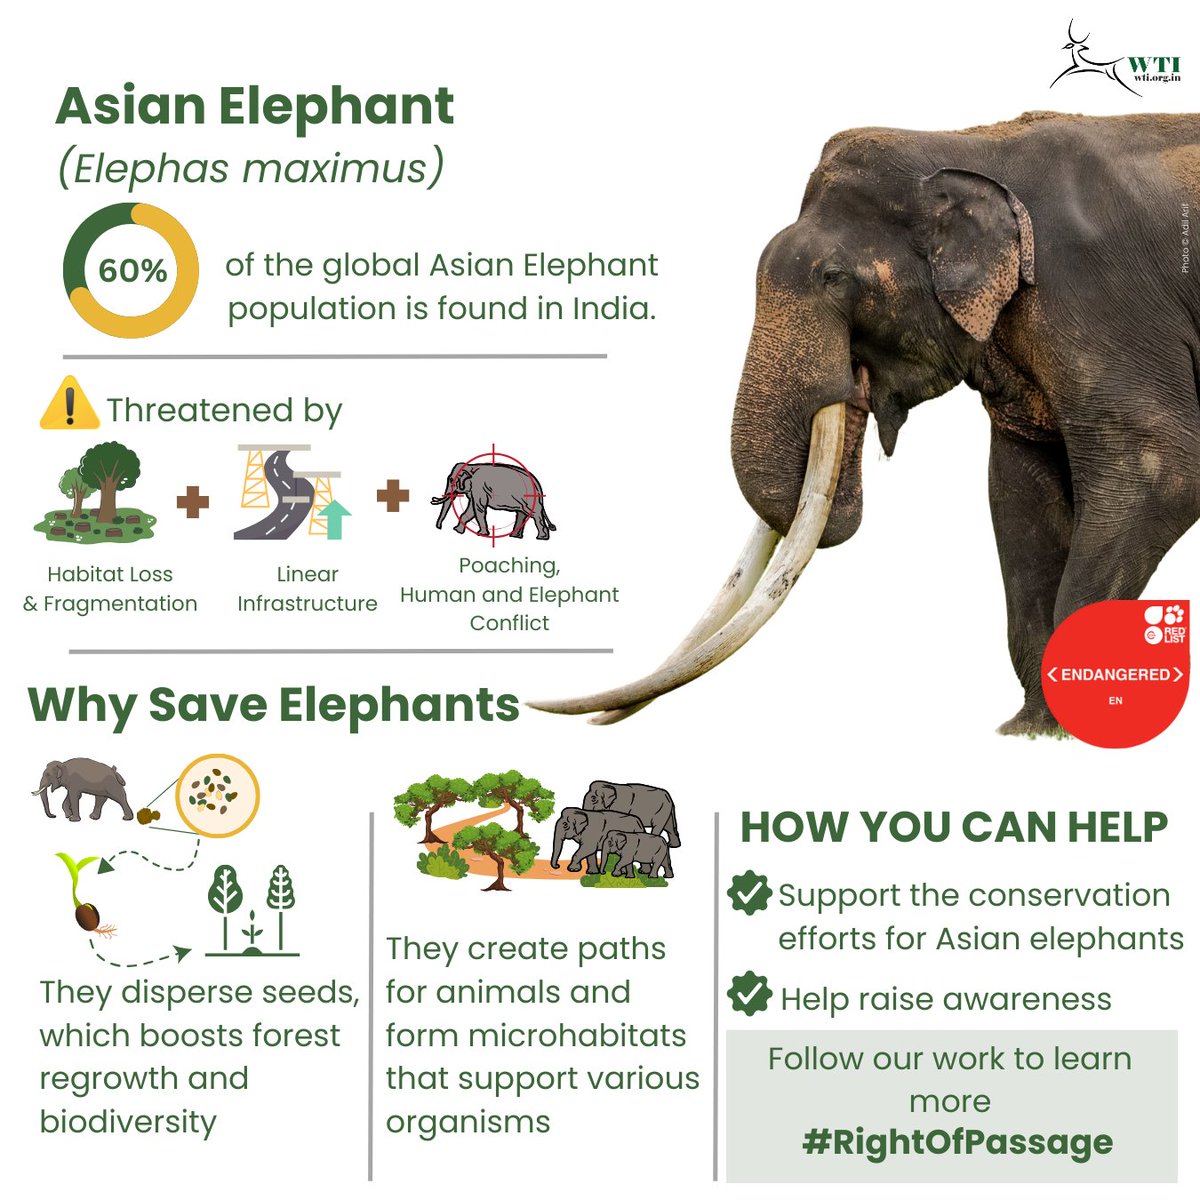 On #SavetheElephantDay let’s remind ourselves of how crucial it is to protect Earth's gentle giants. #WTI is tirelessly working towards safeguarding elephant habitats & mitigating conflicts to ensure a brighter future for India's elephants, the #NationalHeritageAnimal